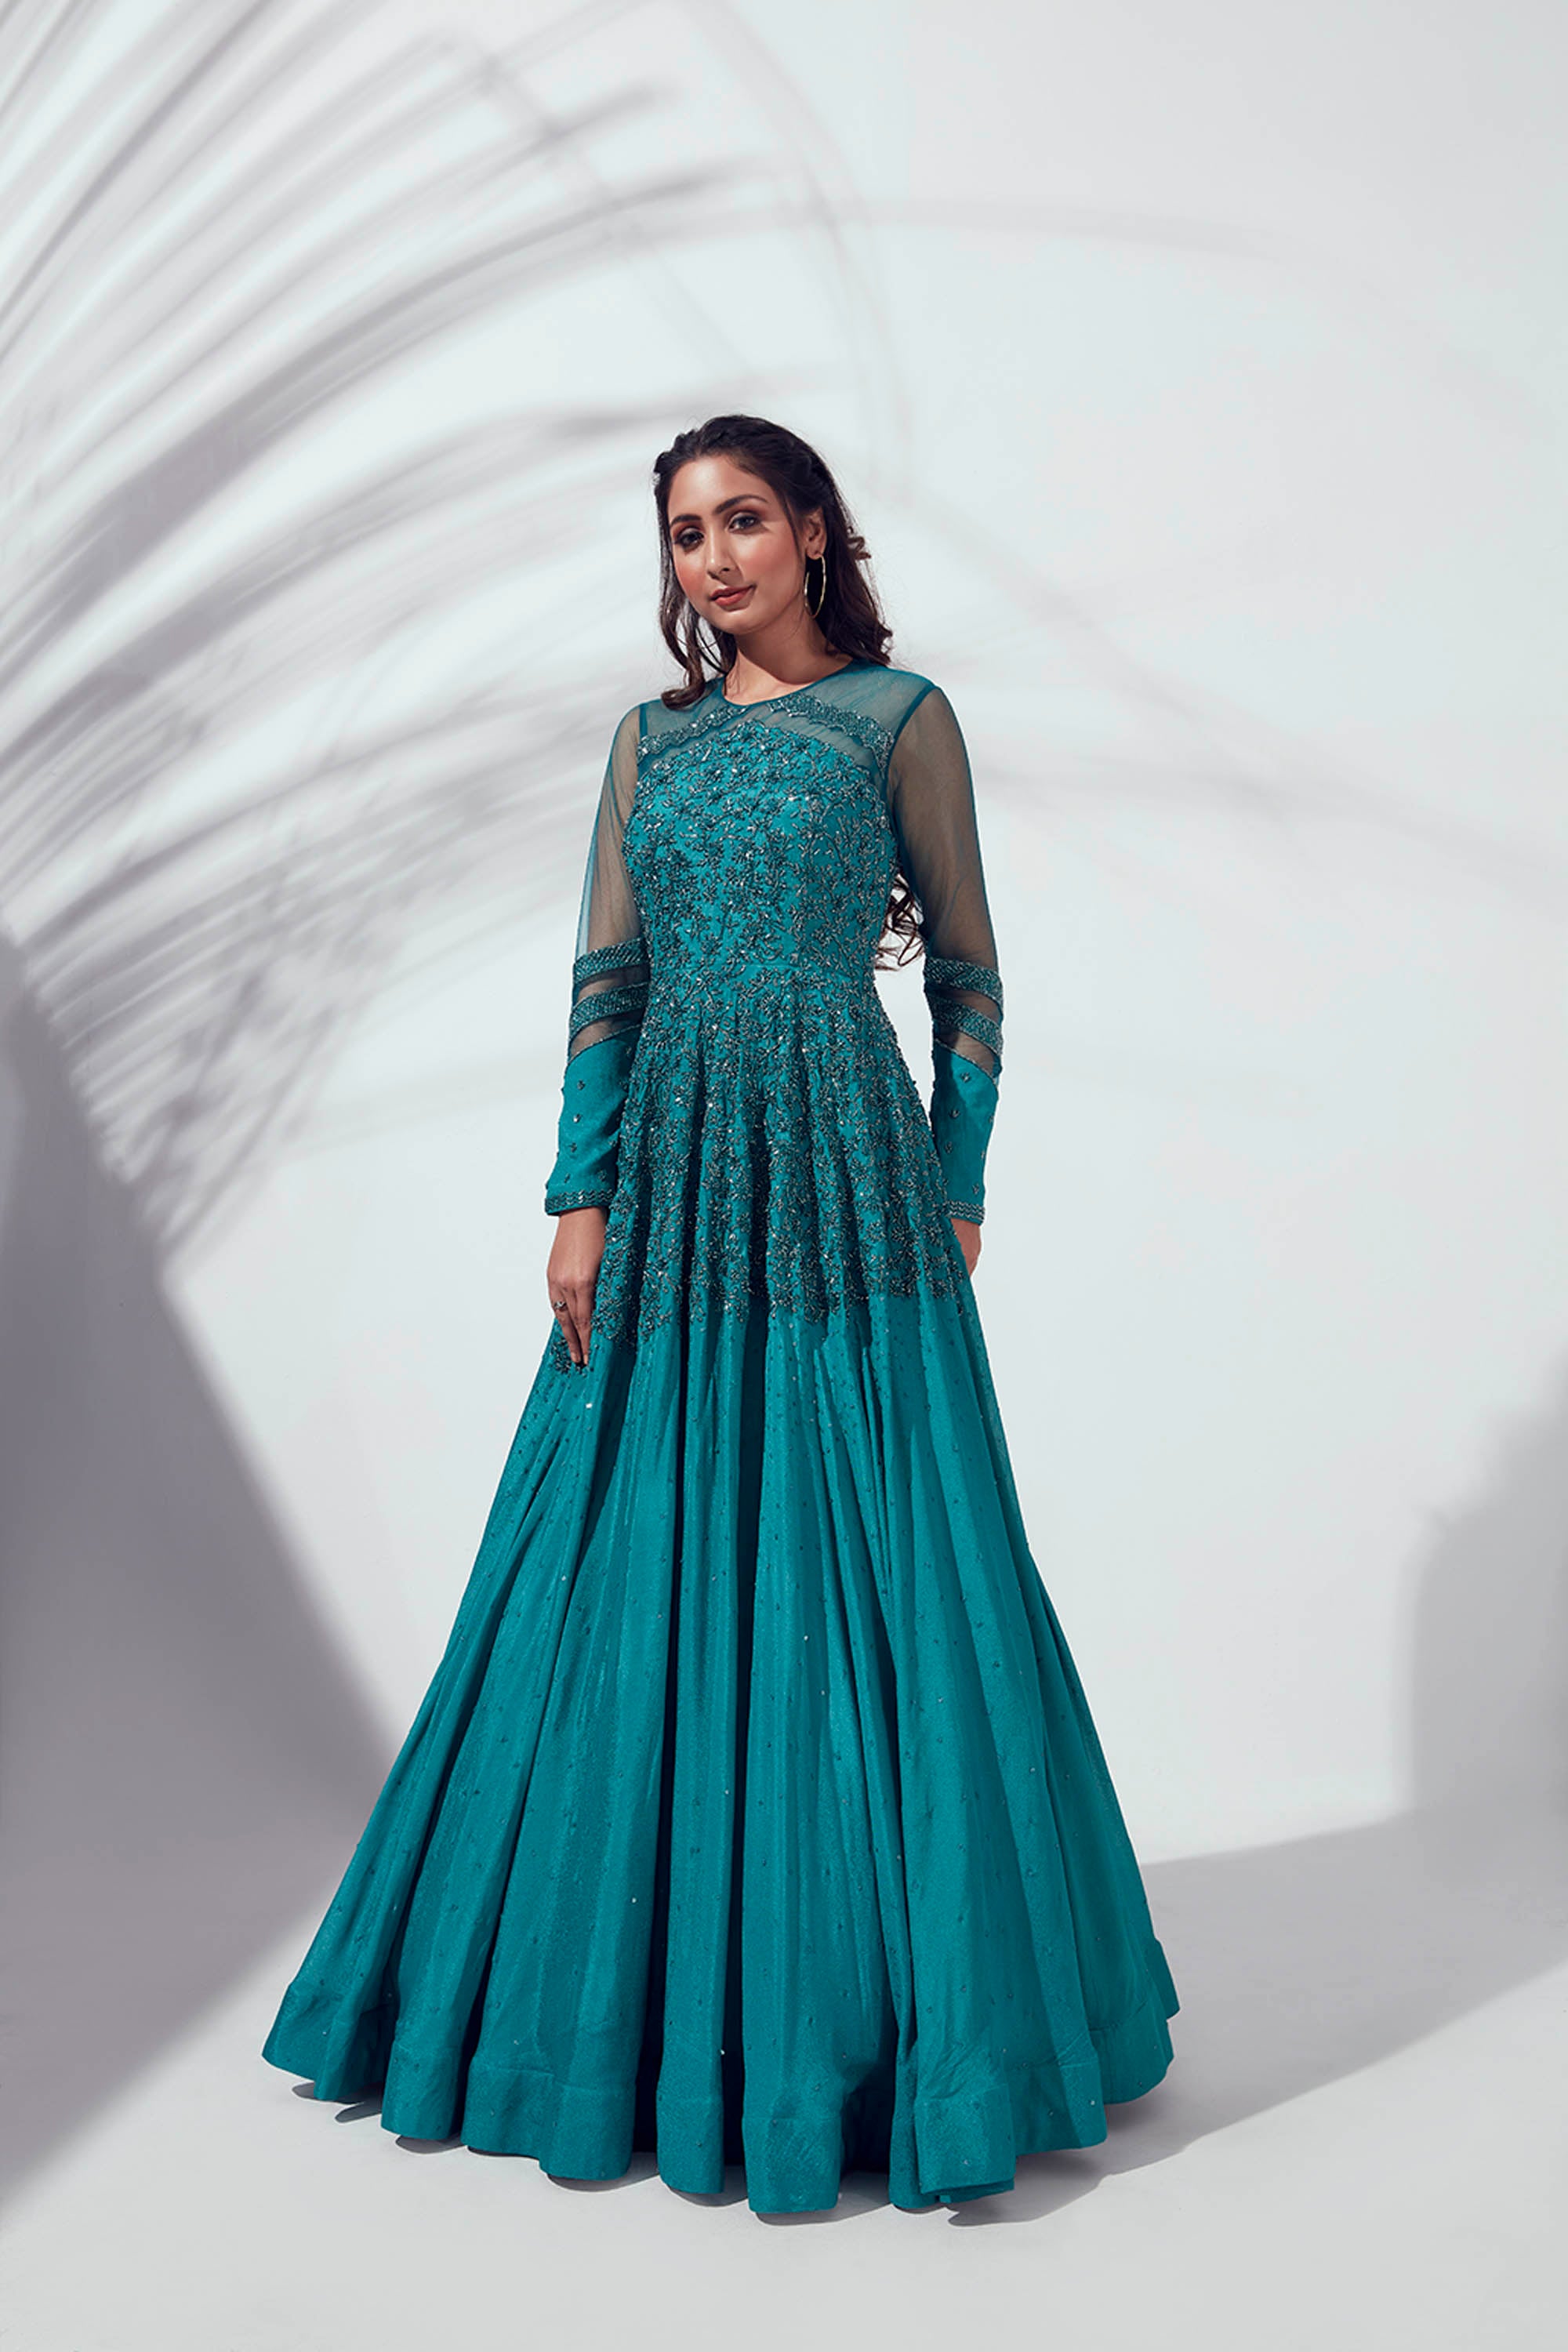 Teal Green Hand-Crafted Gown